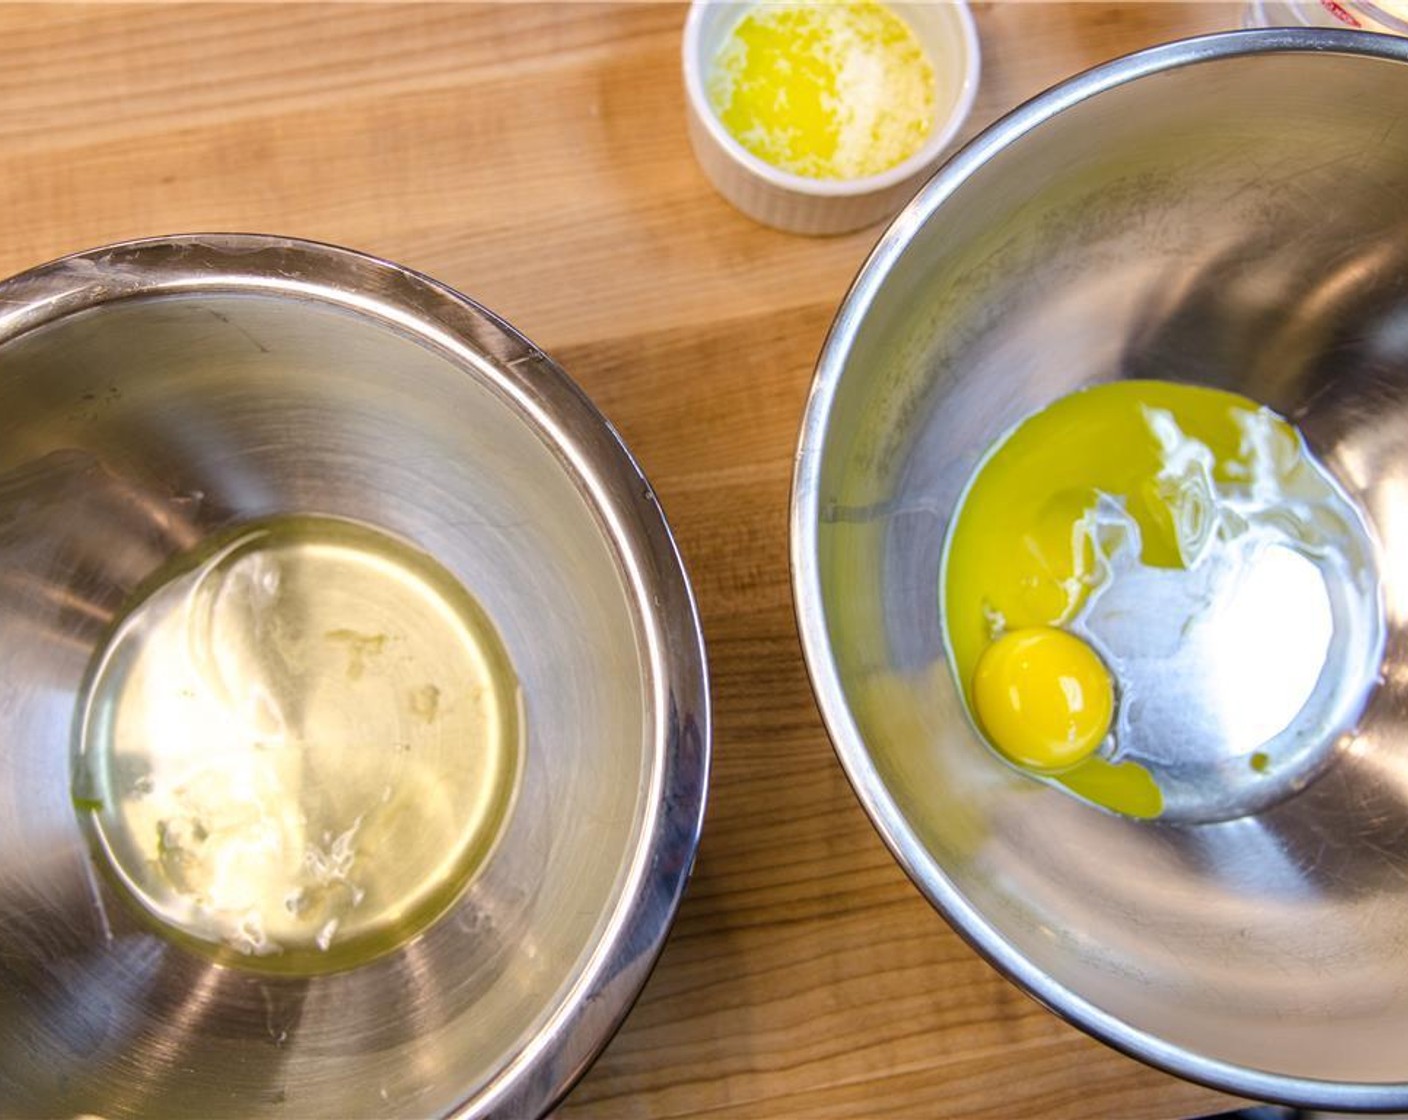 step 2 In a medium bowl, whisk yolks until thick and pale yellow.